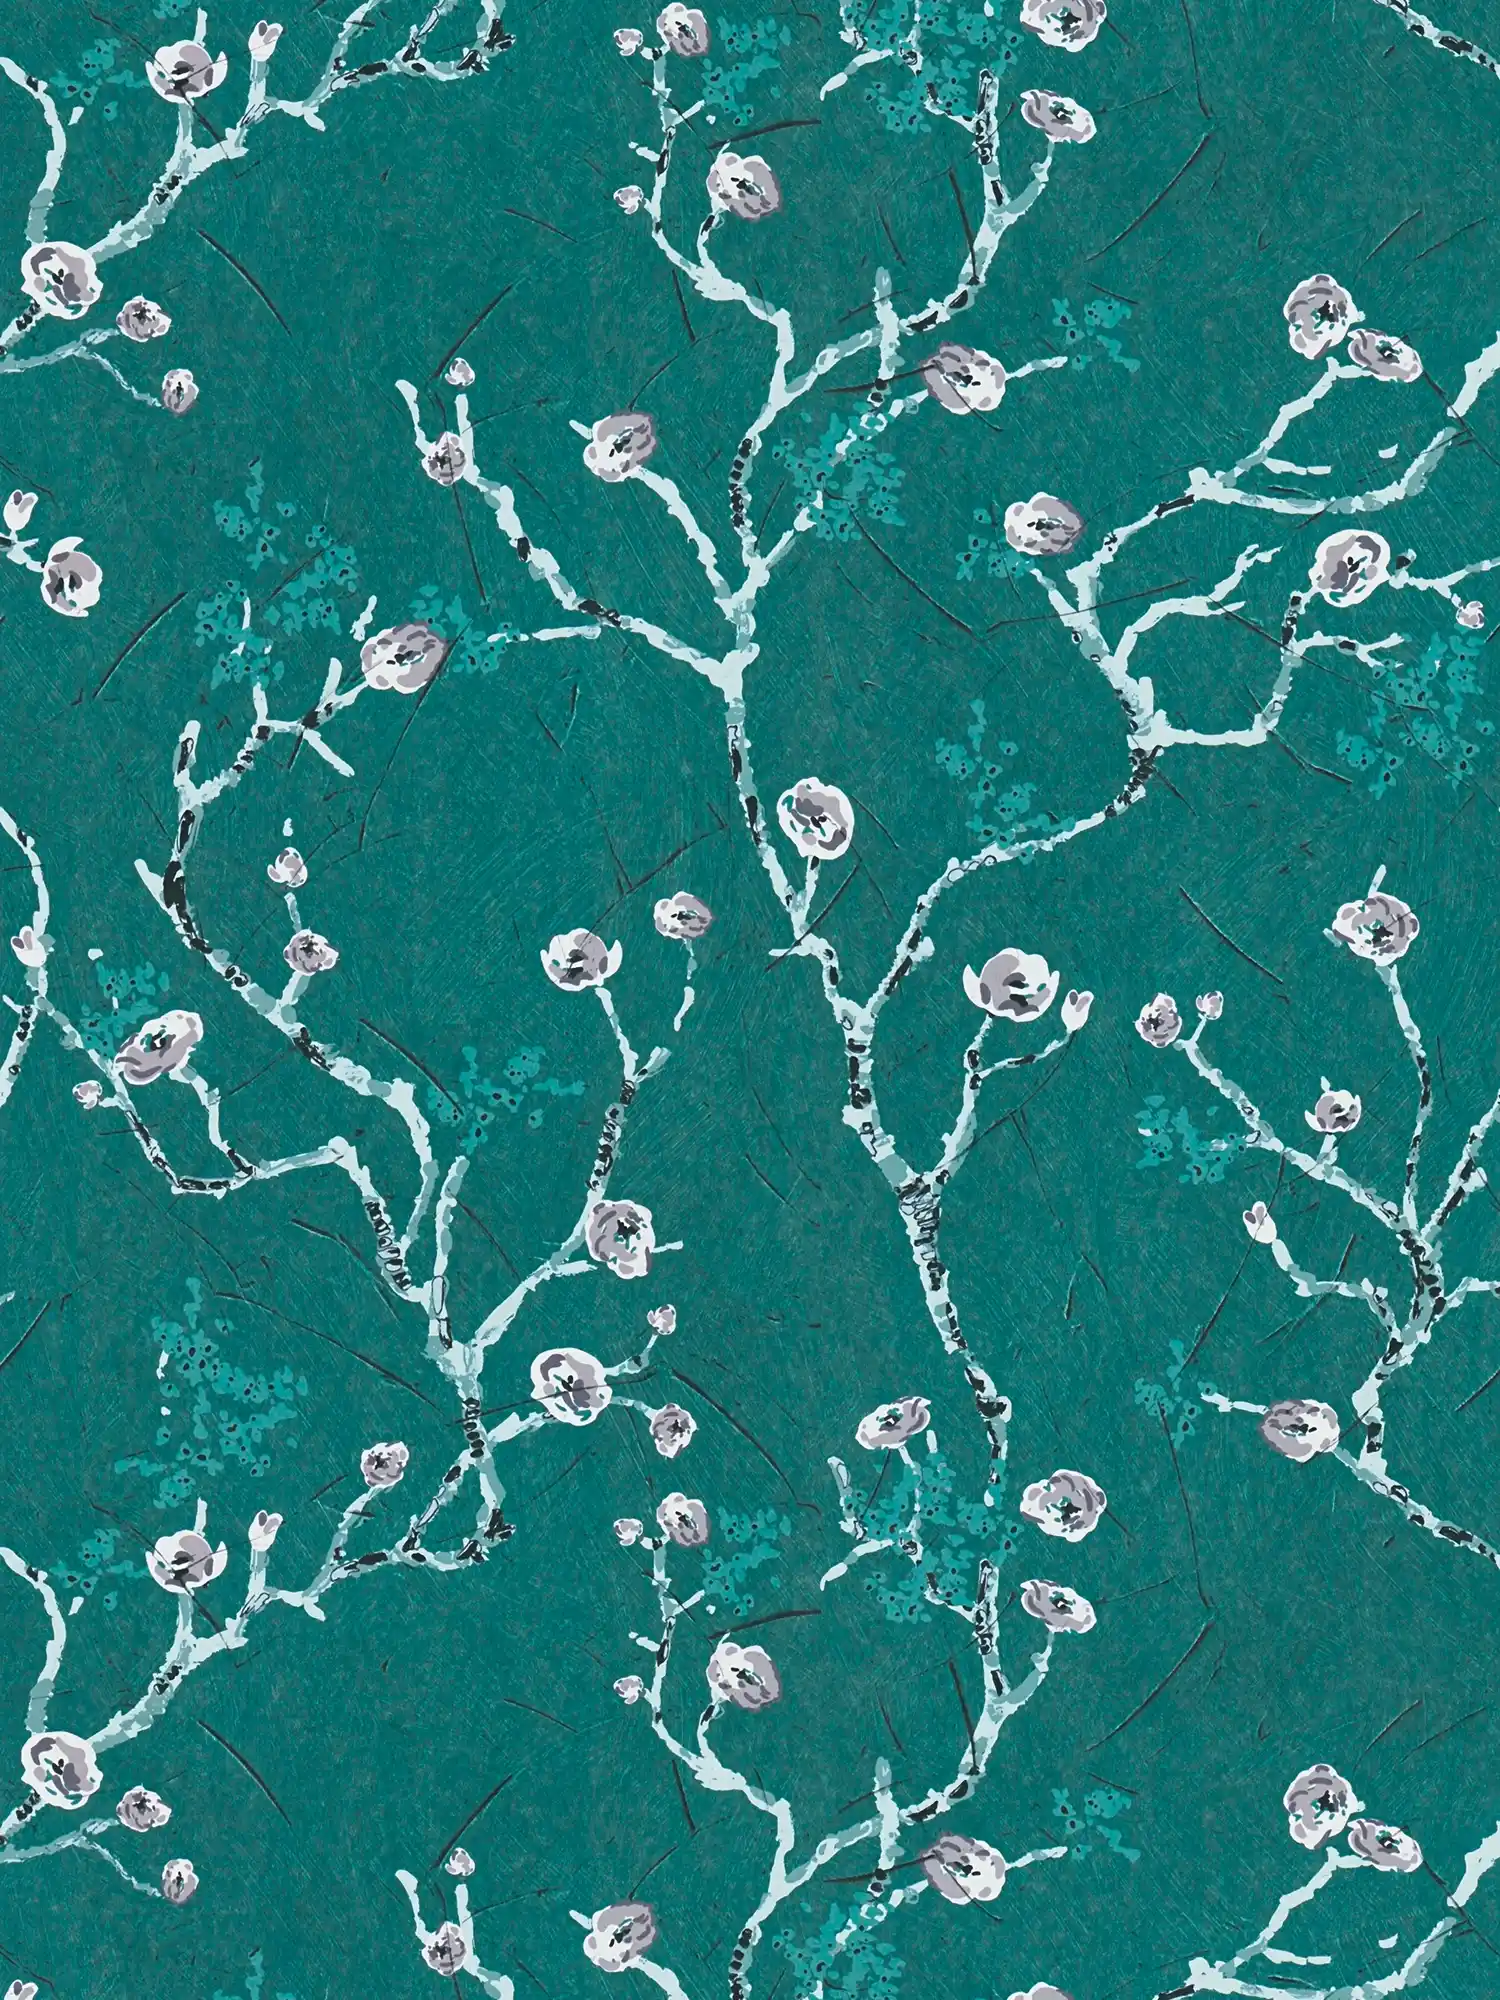 Dark green wallpaper with flowers motif in Asia style
